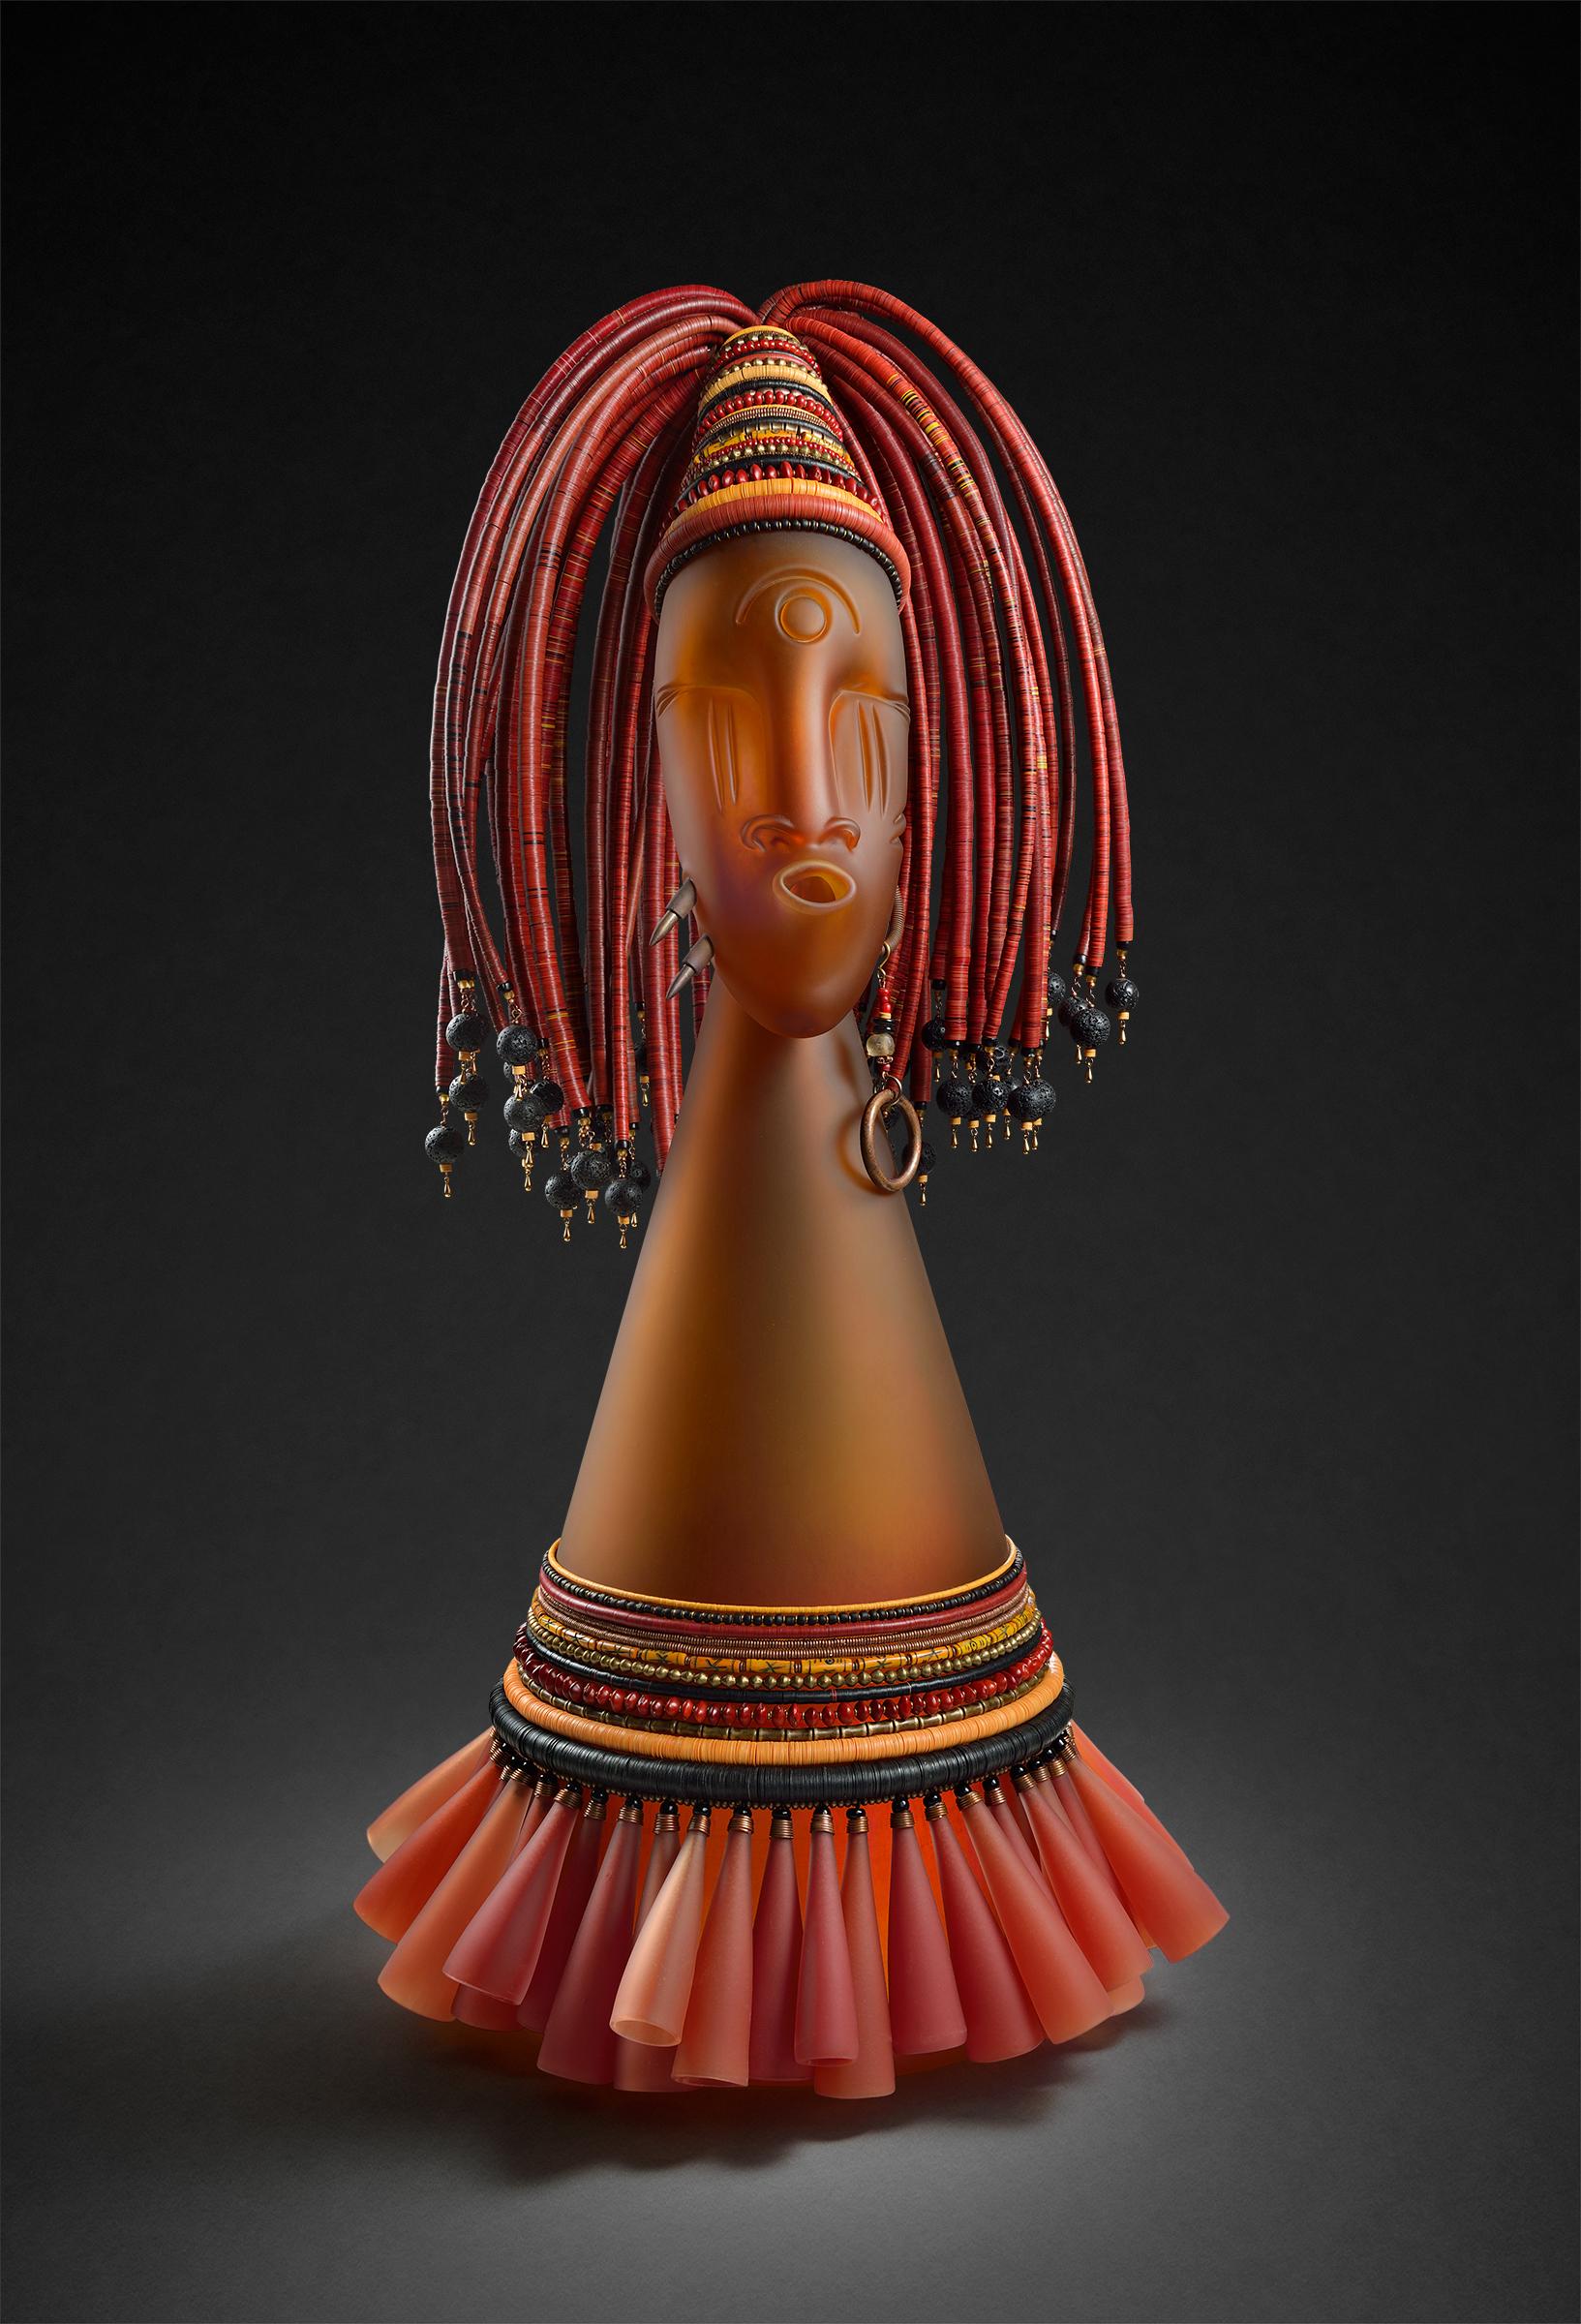 Jenny Pohlman and Sabrina Knowles Figurative Sculpture - "Untitled, Head Cone Series", Blown, Sculpted, and Sandblasted Glass; Beads